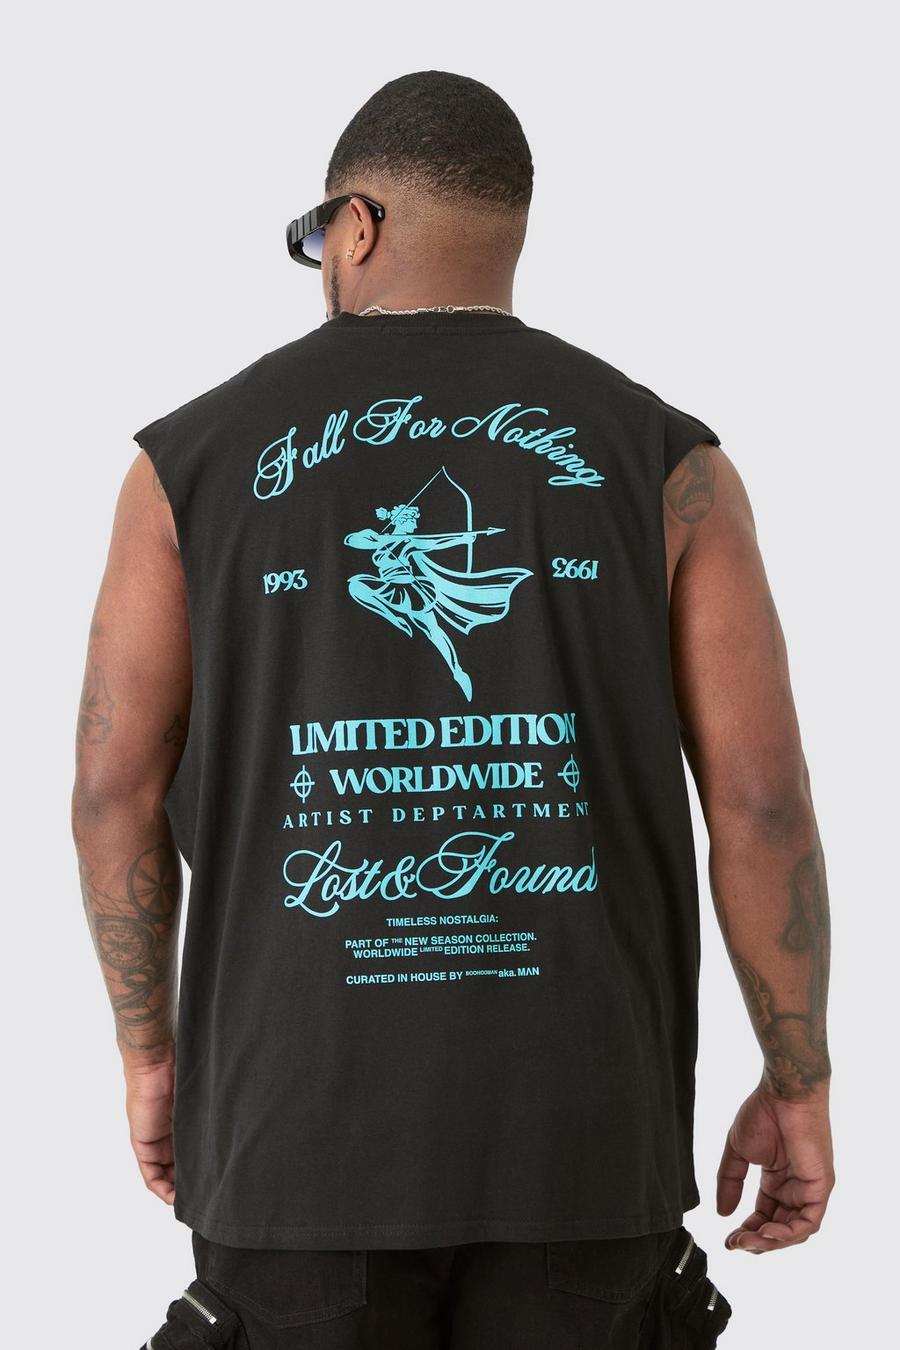 Plus Limited Edition Worldwide Tank In Black